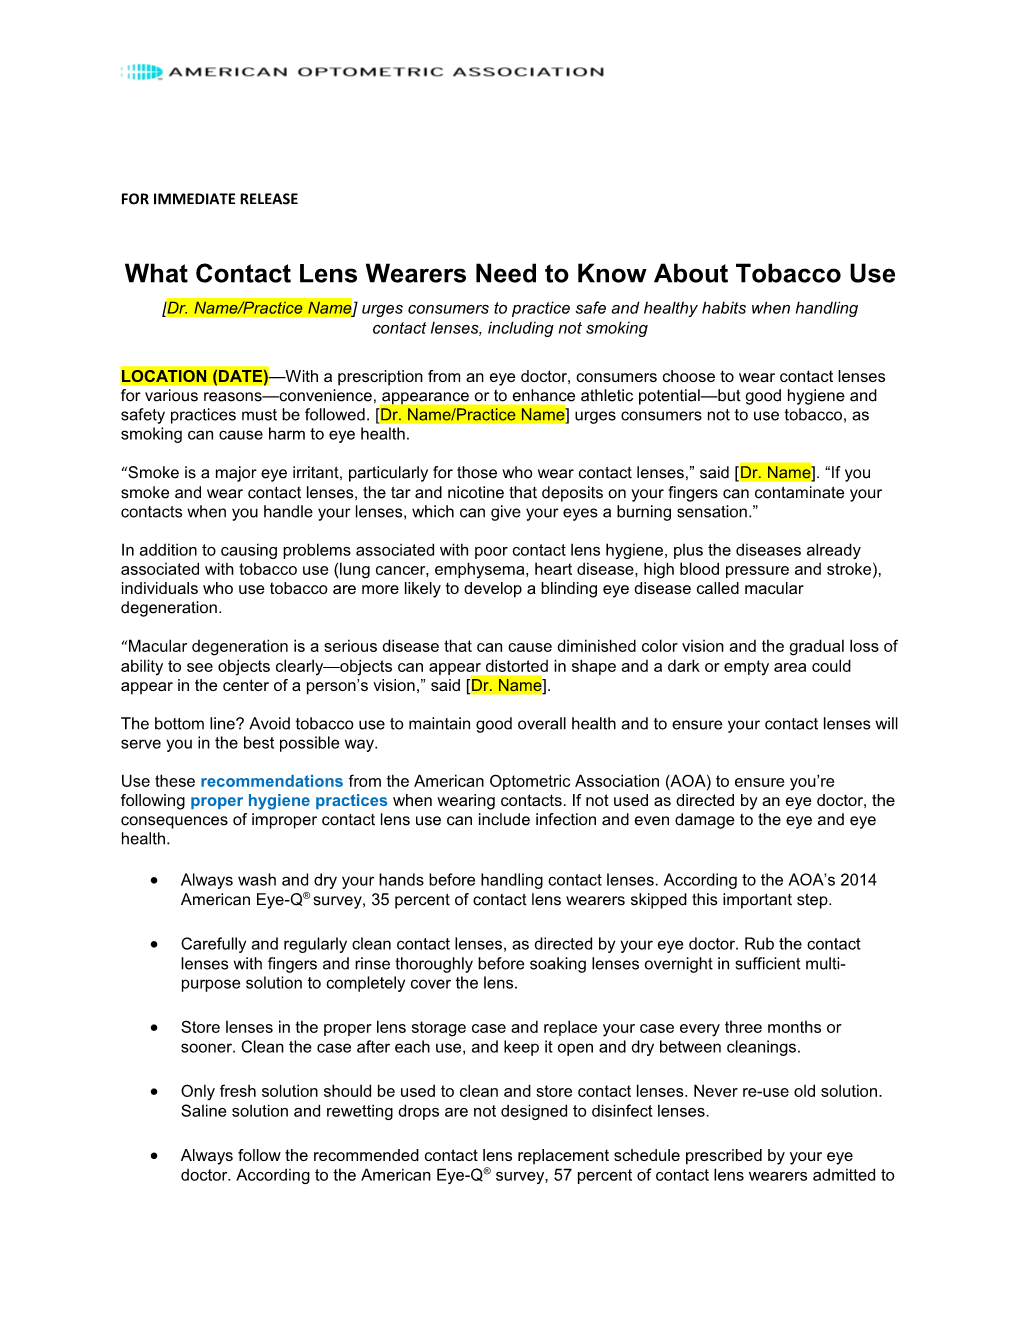 What Contact Lens Wearers Need to Know About Tobacco Use